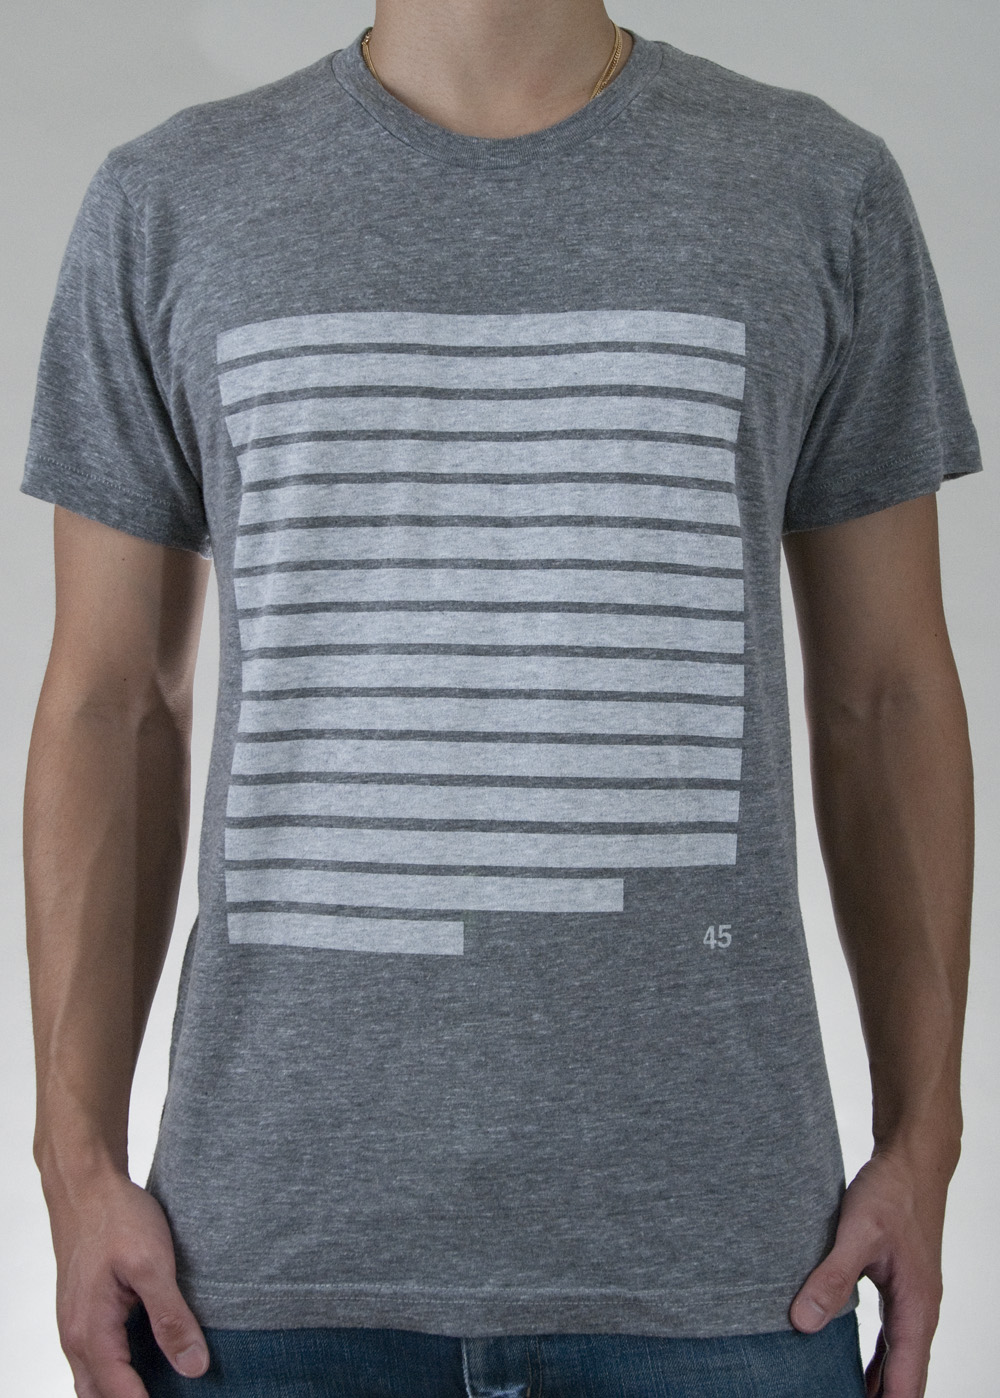 NEW ISO50 Shirts : 45 White Grey Coffee » ISO50 Blog – The Blog of ...